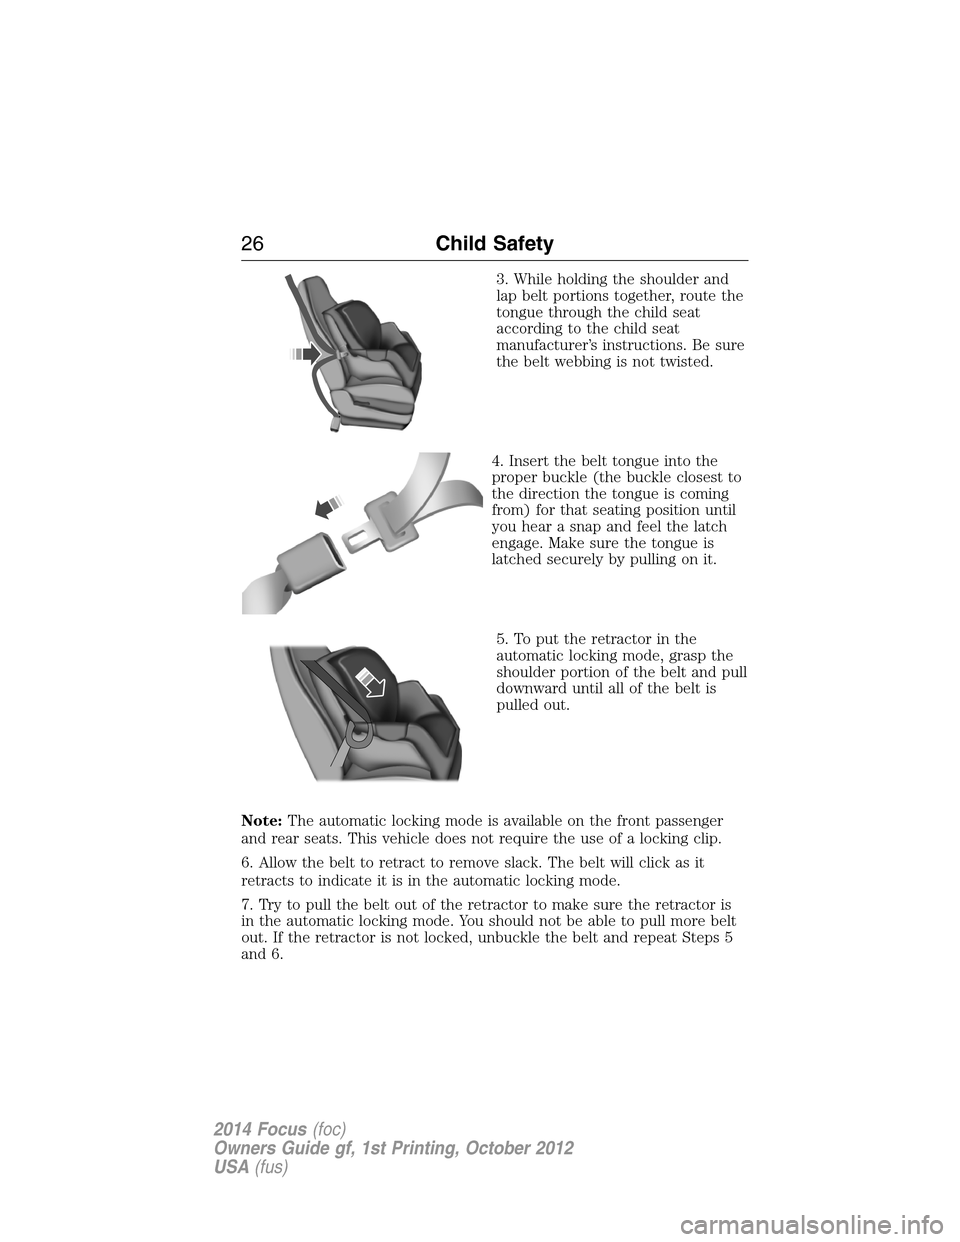 FORD FOCUS 2014 3.G Owners Manual 3. While holding the shoulder and
lap belt portions together, route the
tongue through the child seat
according to the child seat
manufacturer’s instructions. Be sure
the belt webbing is not twisted